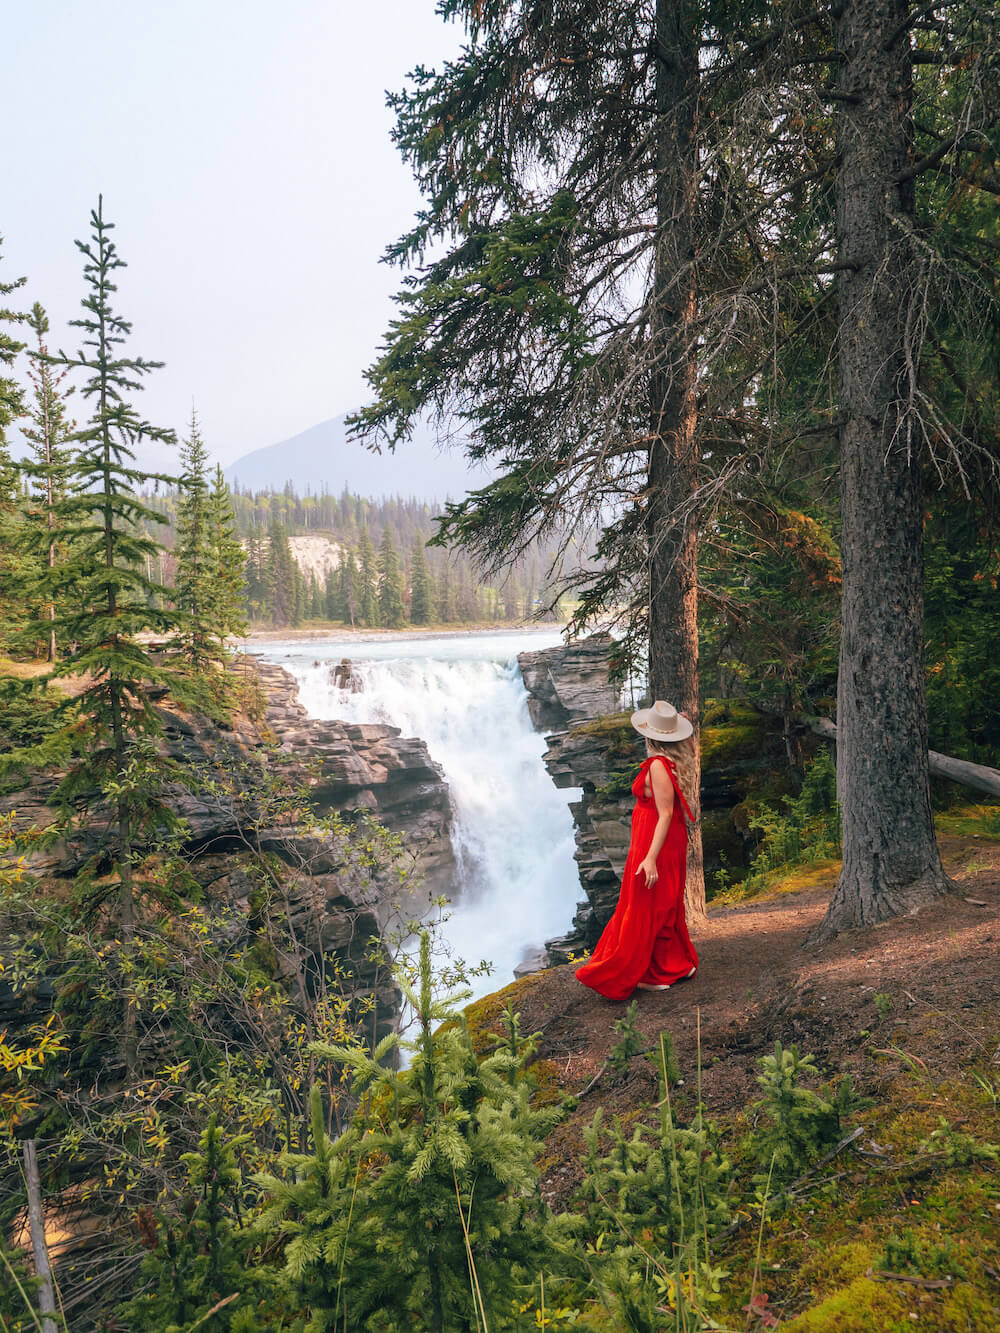 Planning a trip to Jasper National Park soon? Here's a local's guide to some of the best things to do in Jasper. From hikes and trails to adventure sports, family friendly excursions, dining experiences and more. You won't want to miss this guide of the best things to do and places to see in Jasper. Pictured here: Athabasca Falls